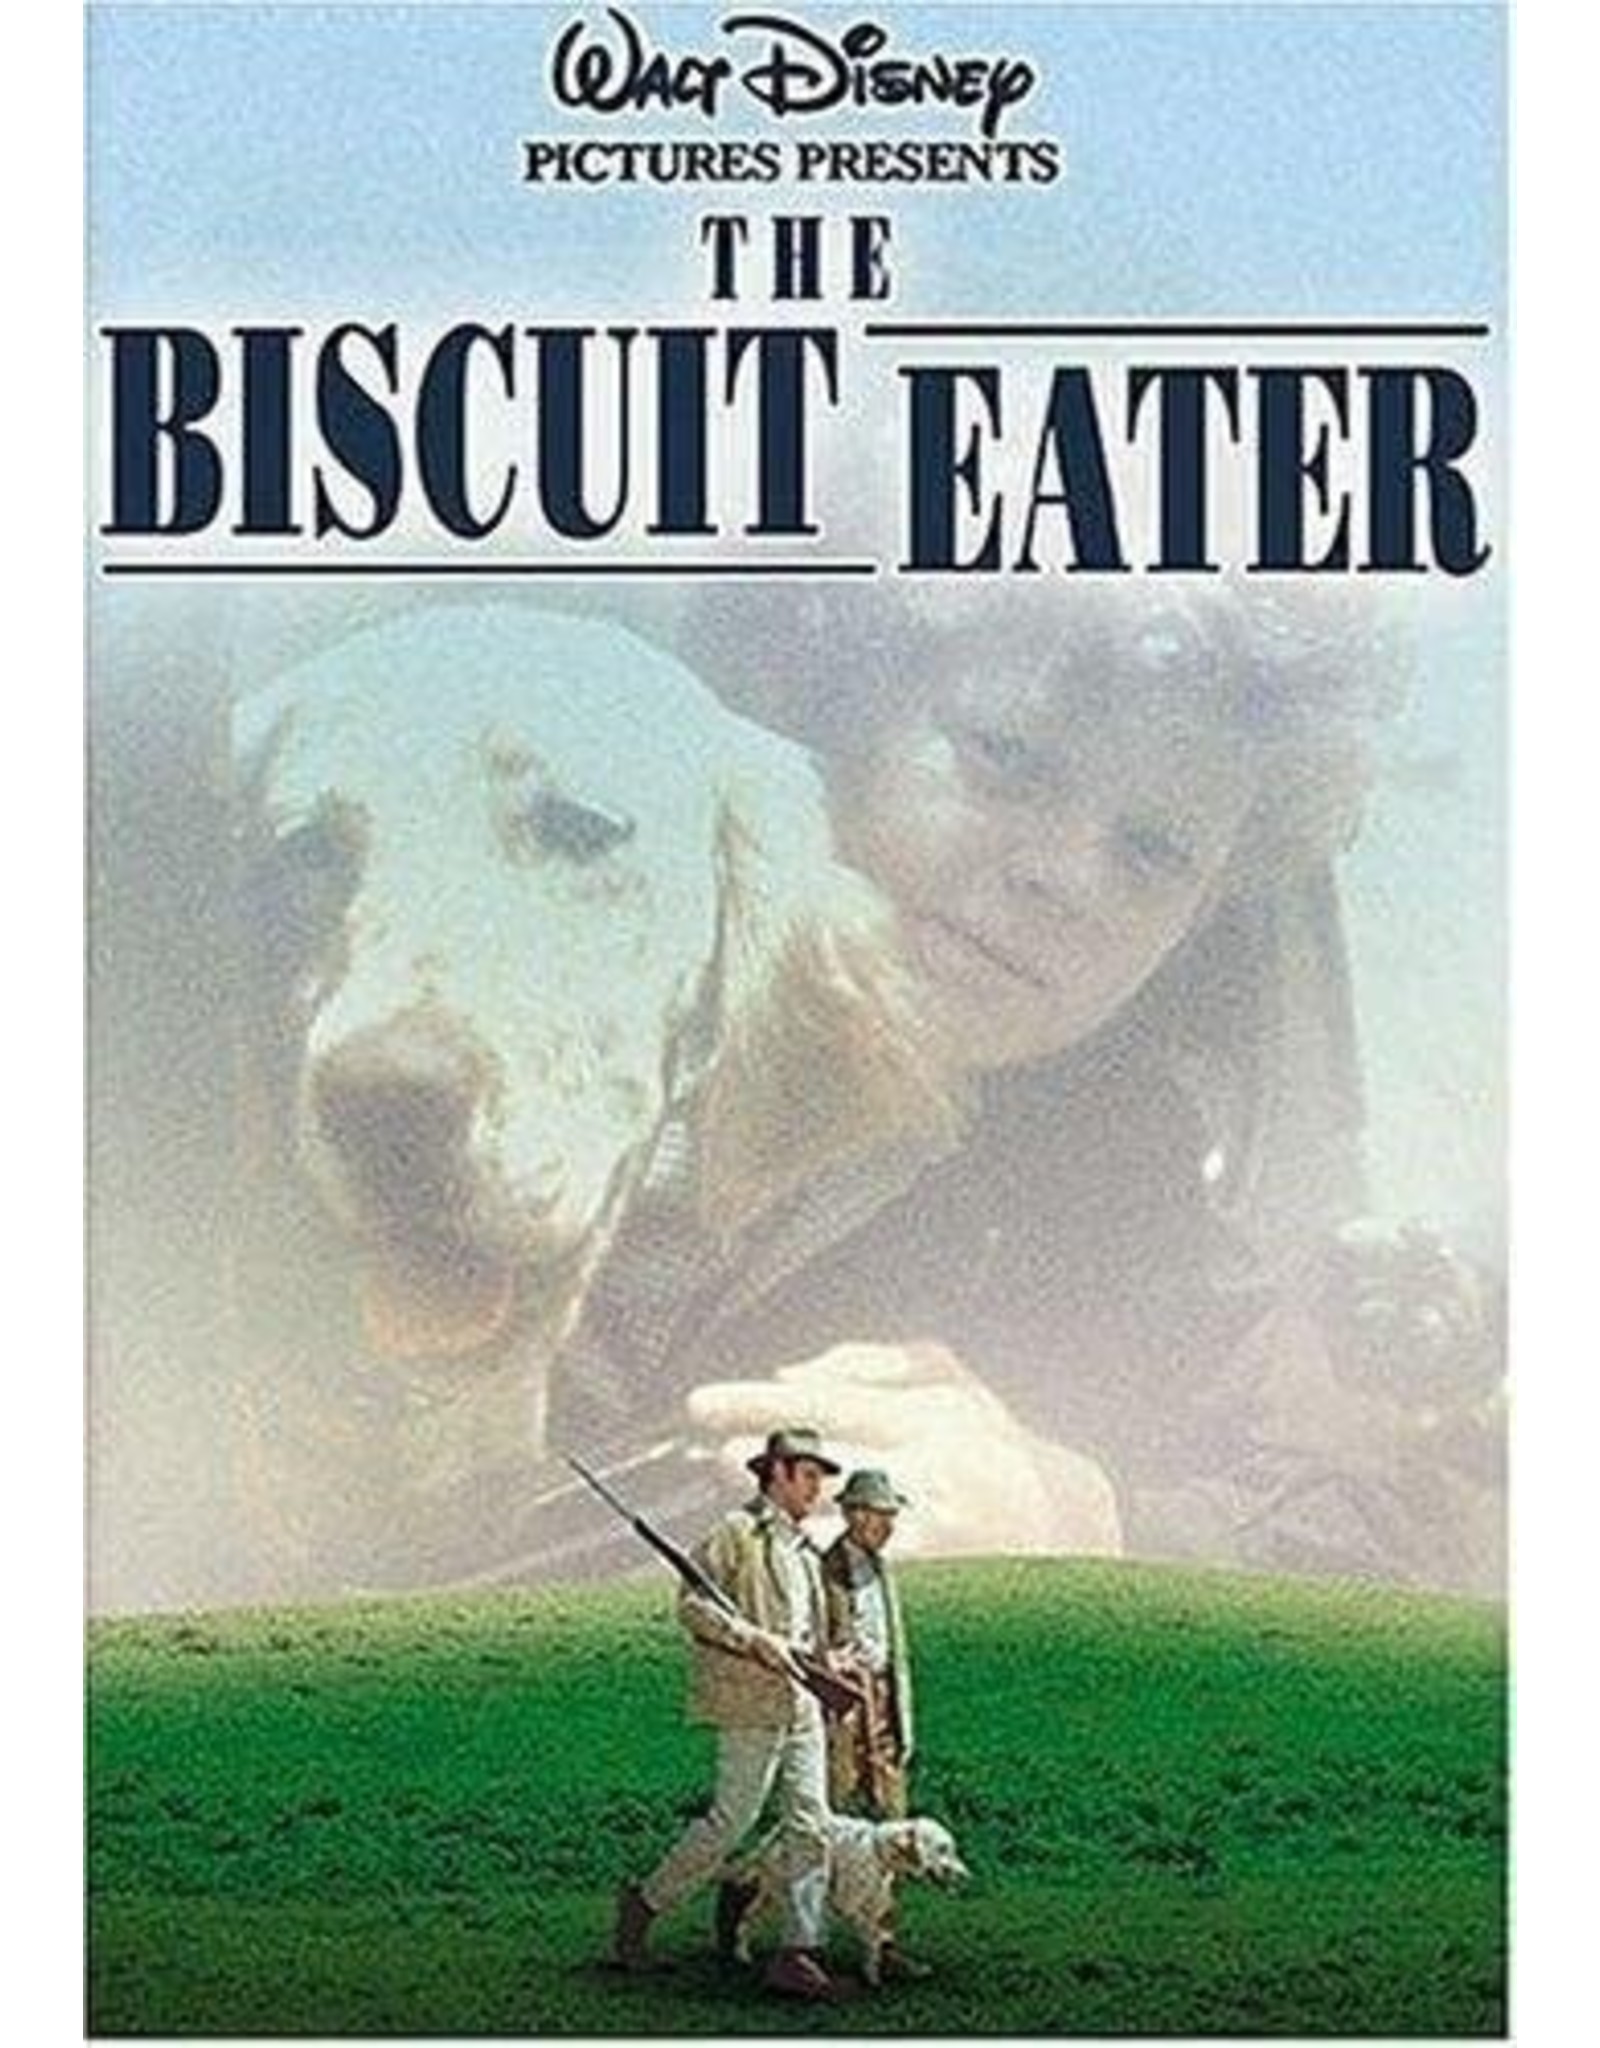 Anime & Animation Biscuit Eater, The (USED)